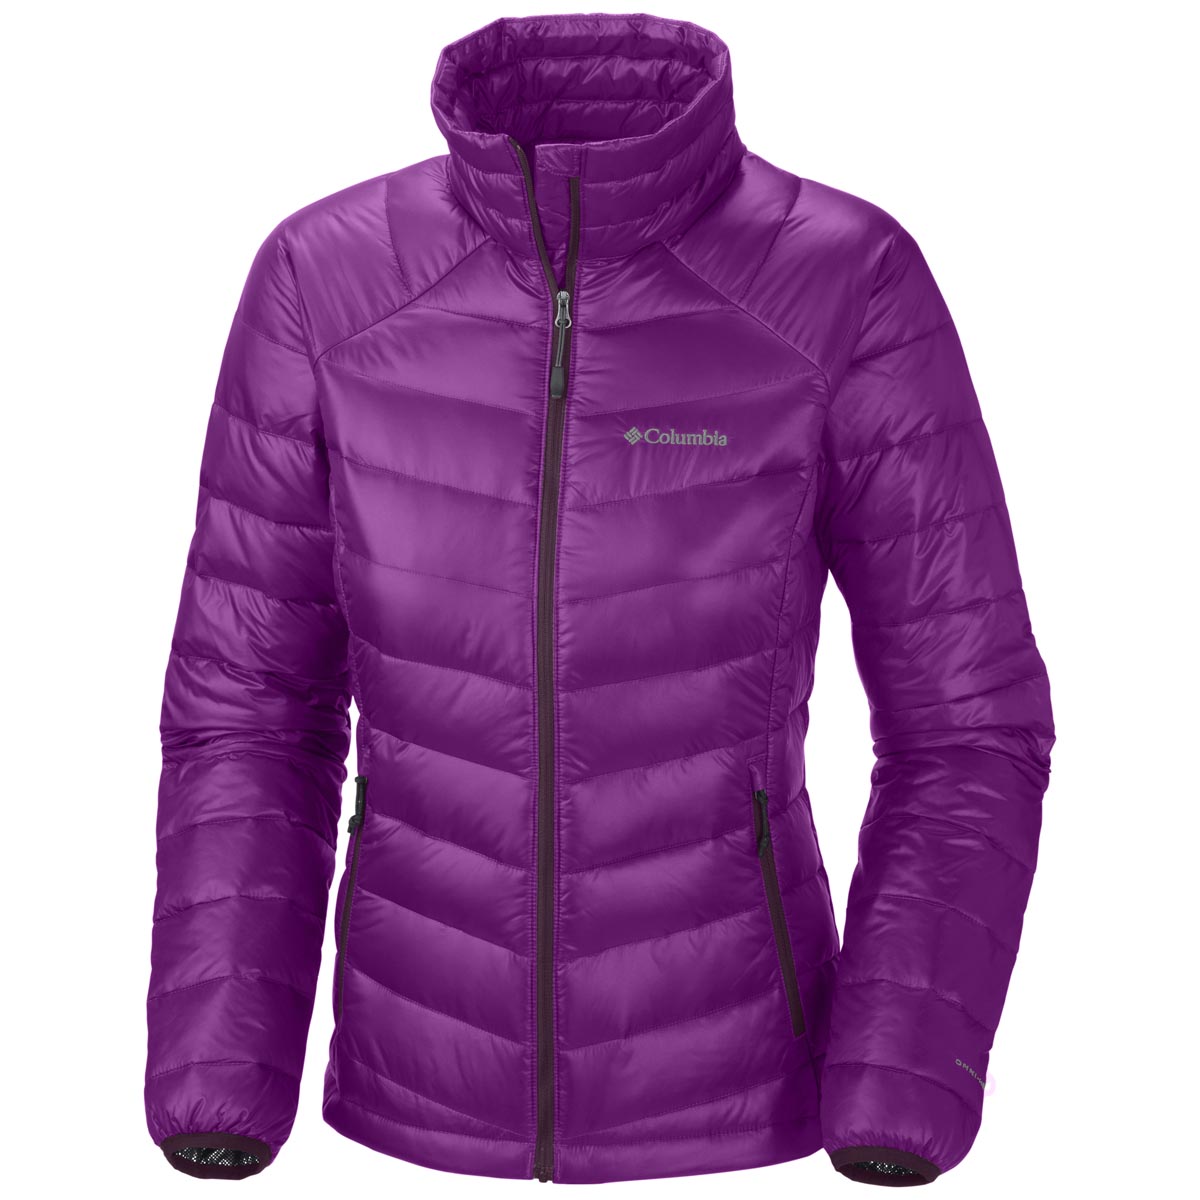 Columbia Women's Platinum 860 TurboDown Jacket Discontinued Pricing